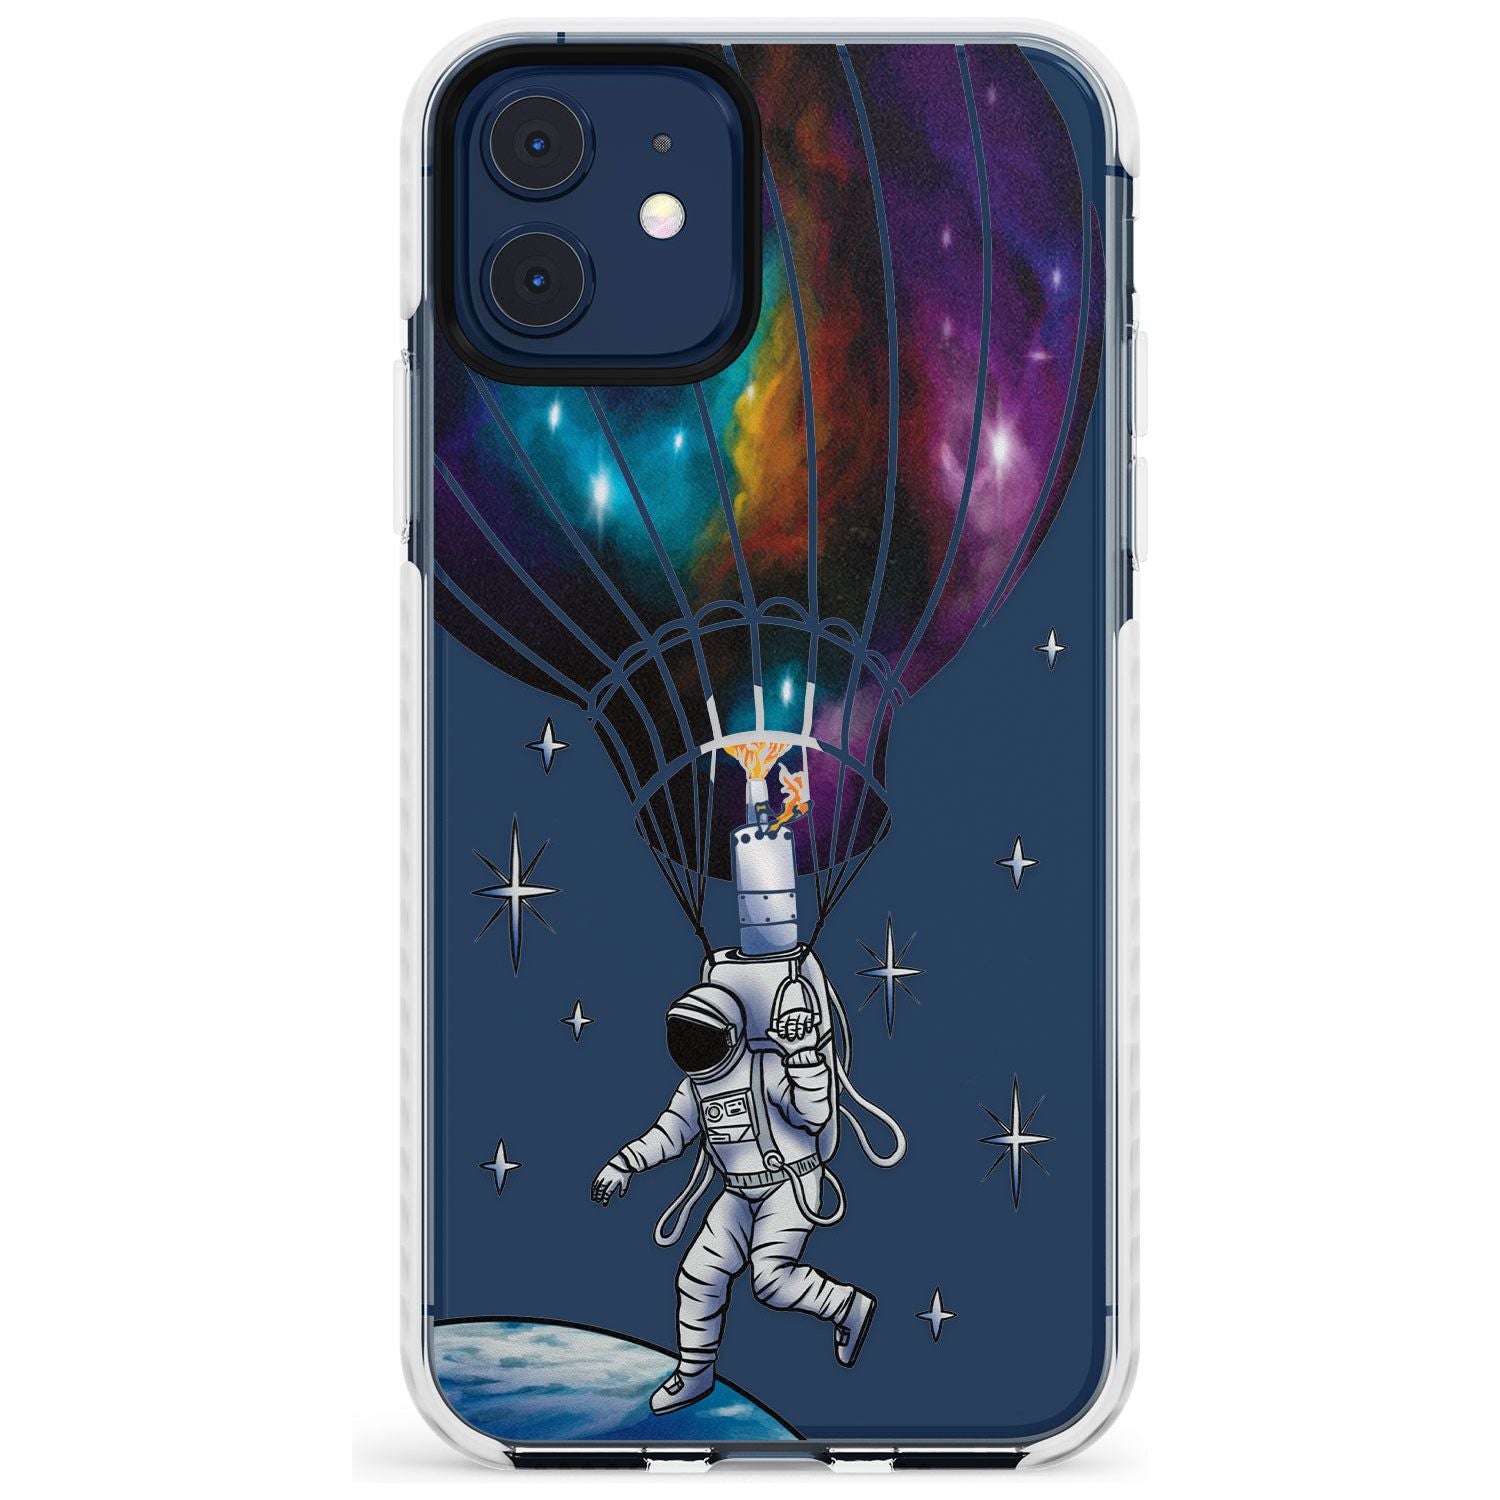 SOLO ODYSSEY Slim TPU Phone Case for iPhone 11